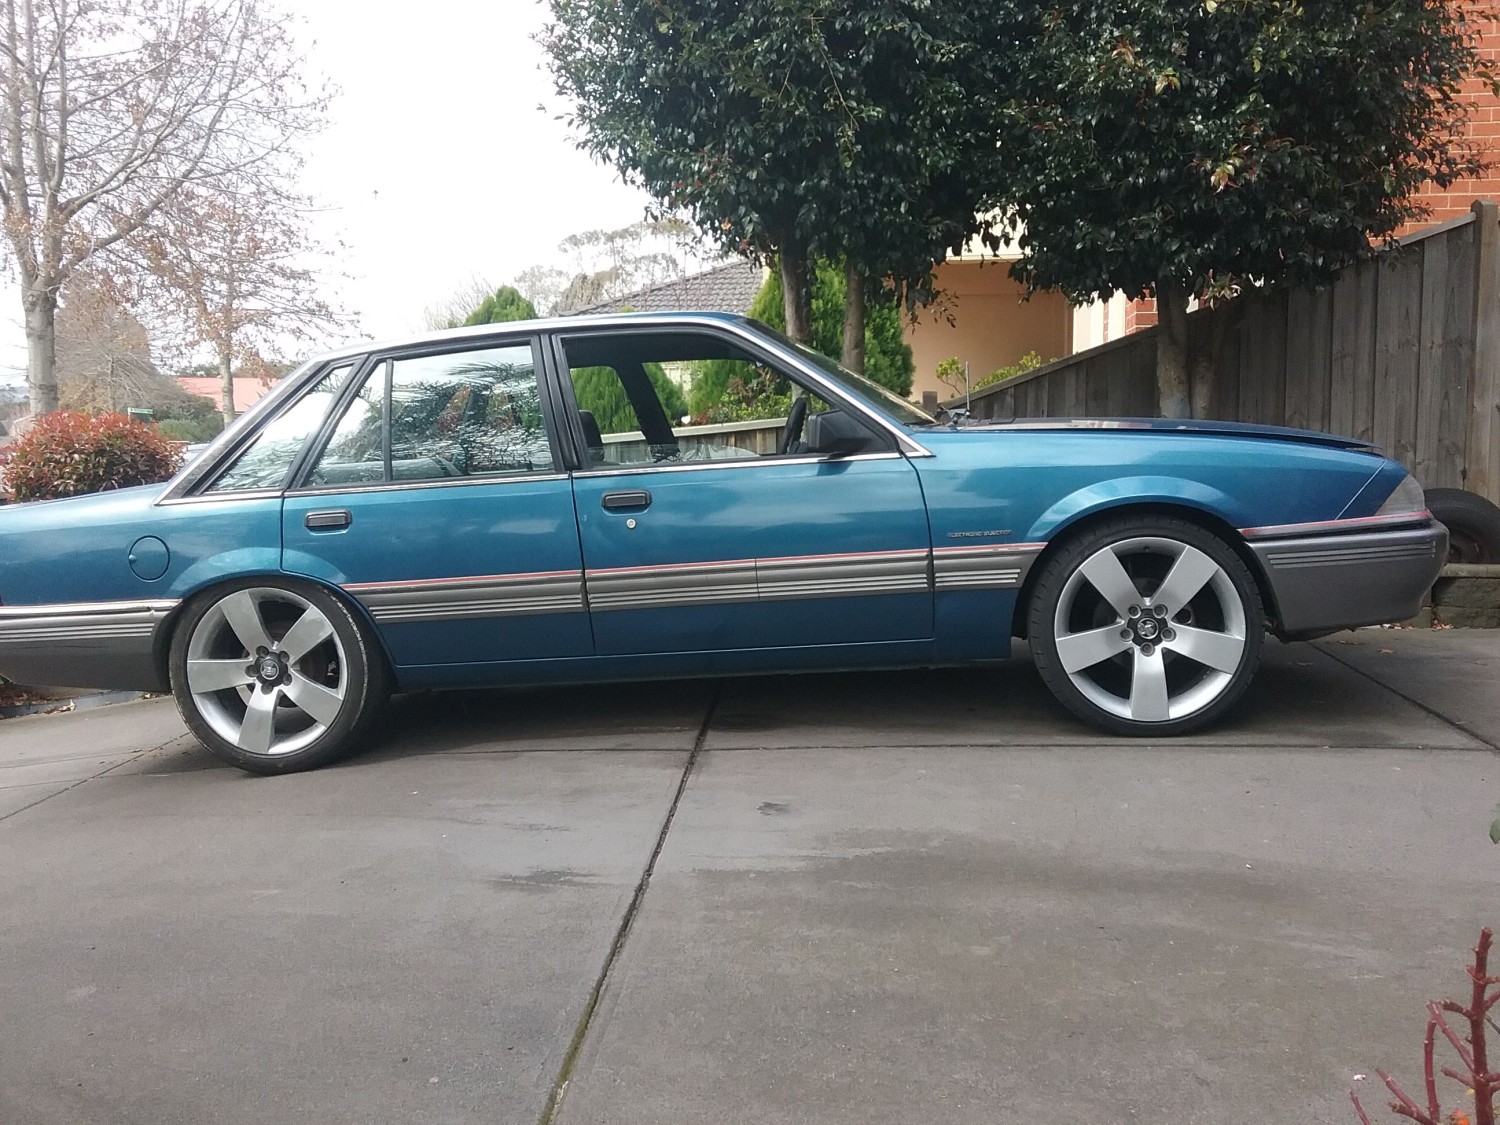 Holden Vl Commodore Berlina Turbo Shannons Club Online Show